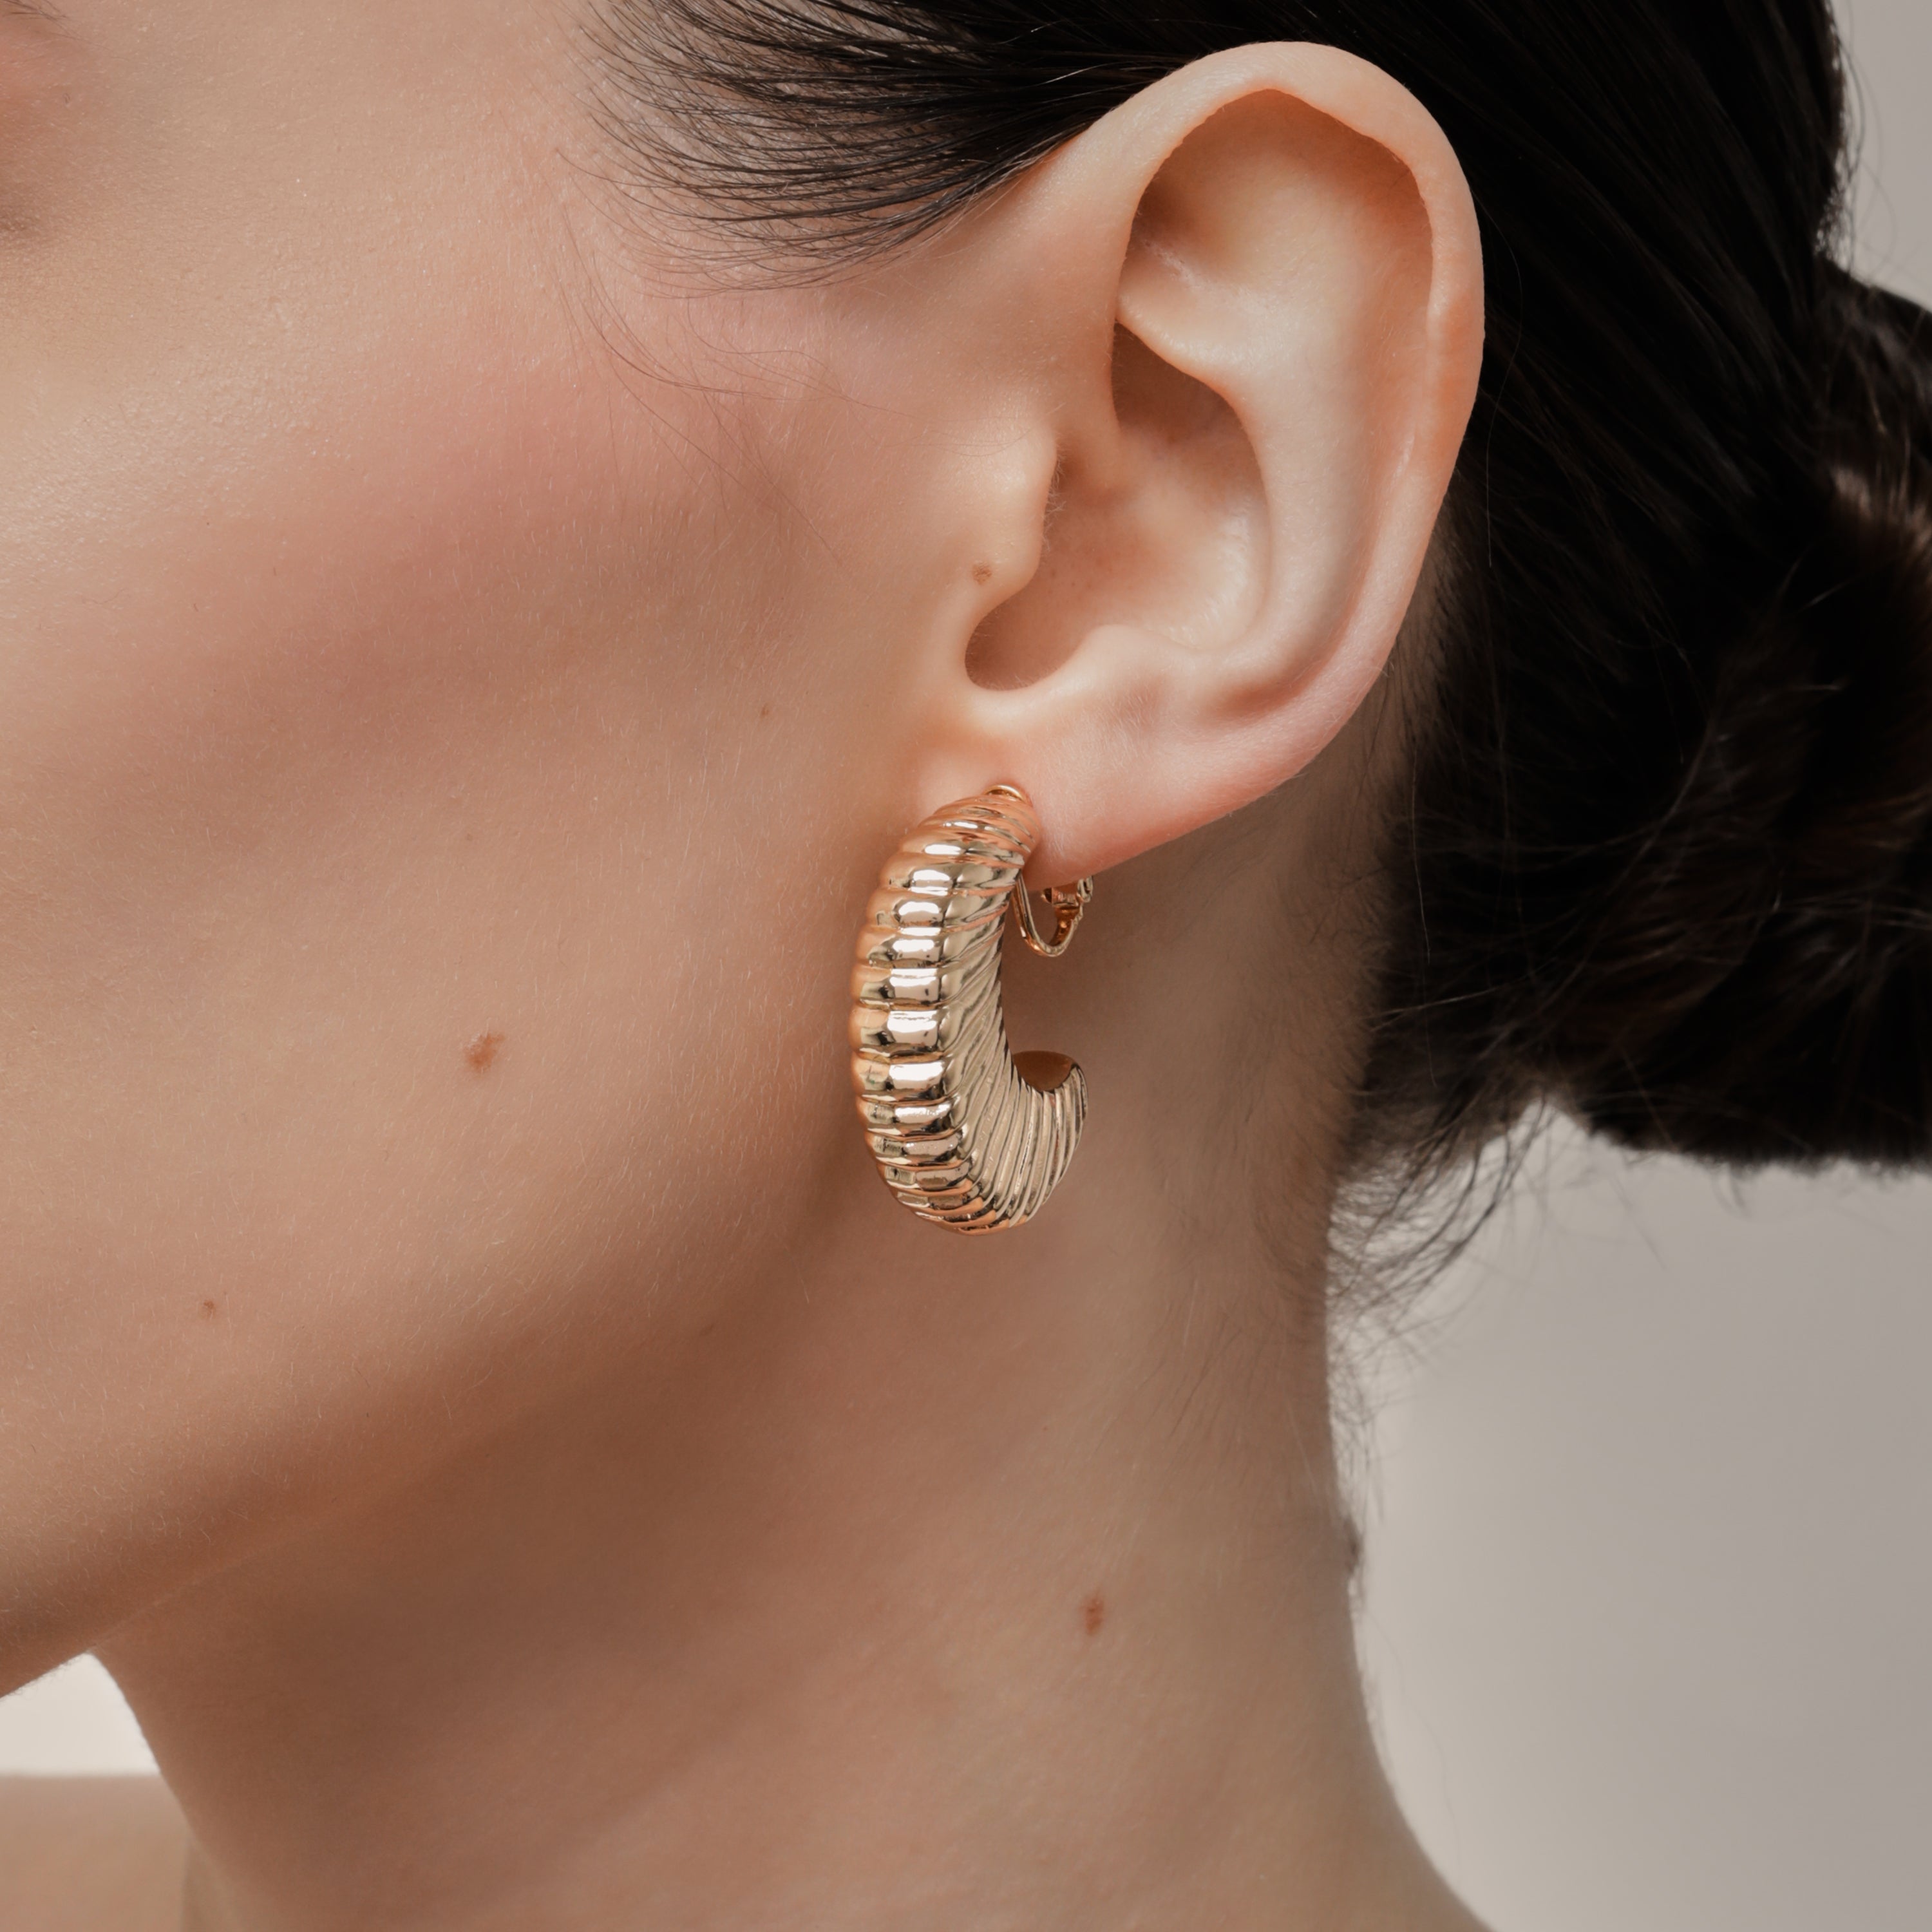 A model wearing the Deco Hoop Clip On Earrings in Gold. Designed with a screwback closure, these earrings provide a secure hold for all types of ears. Whether you have thick, sensitive, small, or keloid prone ears, these earrings can be manually adjusted to fit your size. Enjoy 8-12 hours of wear in these elegant, versatile earrings.